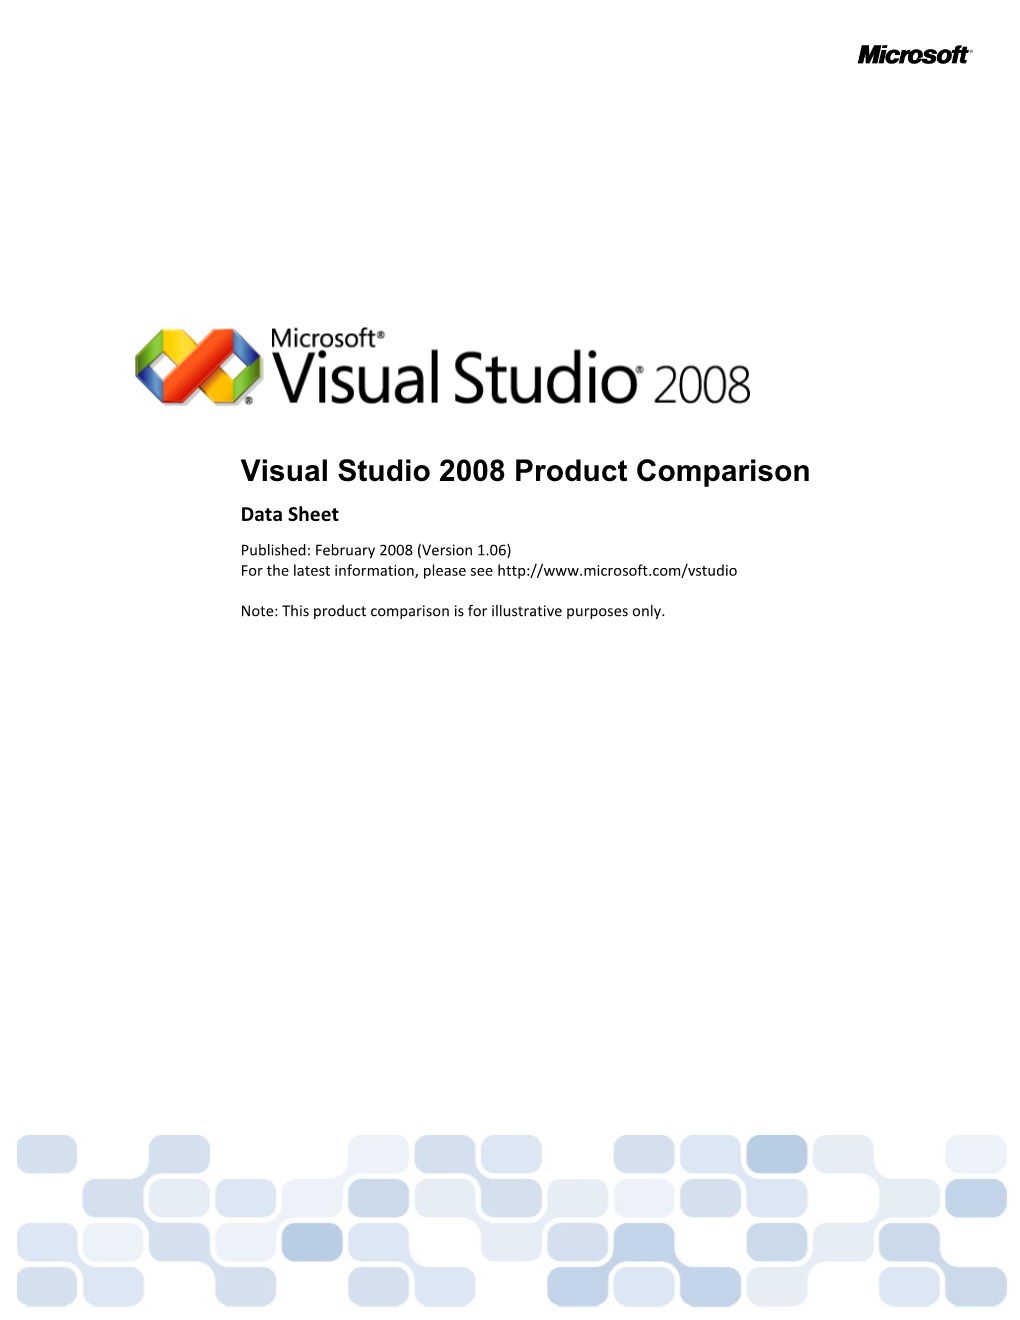 Visual Studio 2008 Product Comparison Data Sheet Published: February 2008 (Version 1.06) for the Latest Information, Please See